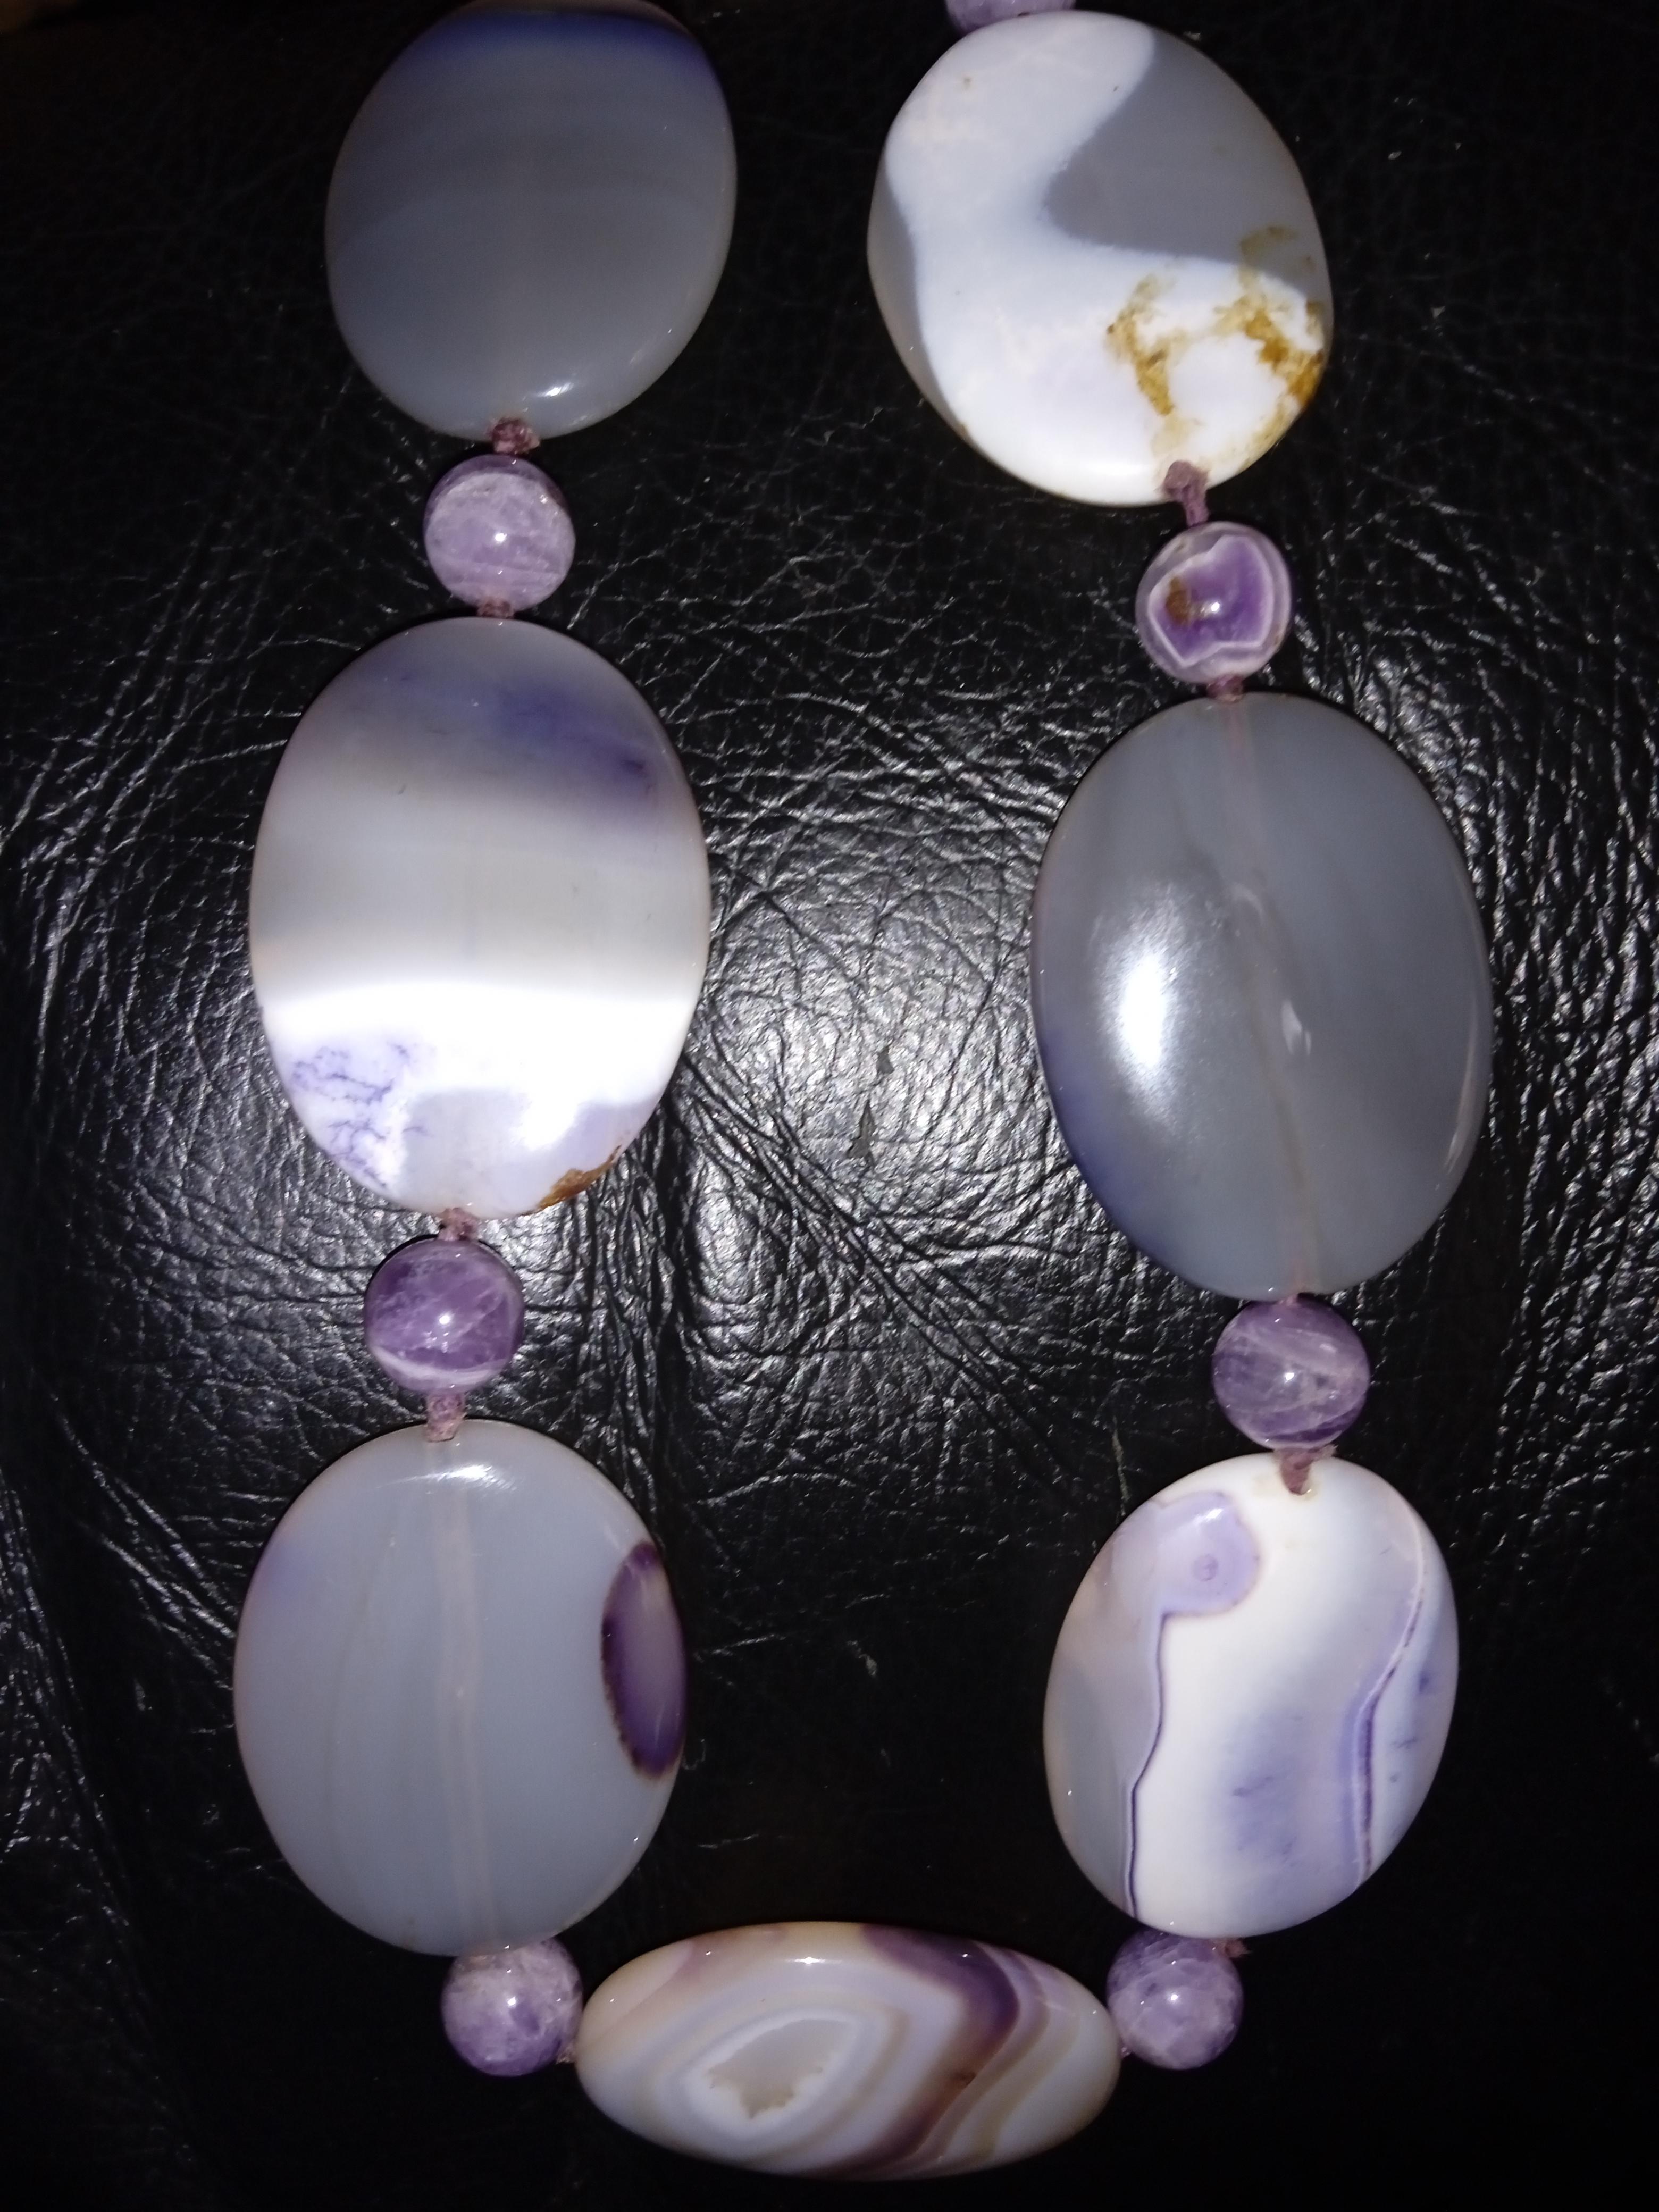 Add a touch of nature to your jewellery collection with this handmade Natural Purple Agate Necklace. The choker style necklace features a gorgeous multicoloured Agate stone as the main stone, and is adjustable to fit any neck size with a hook